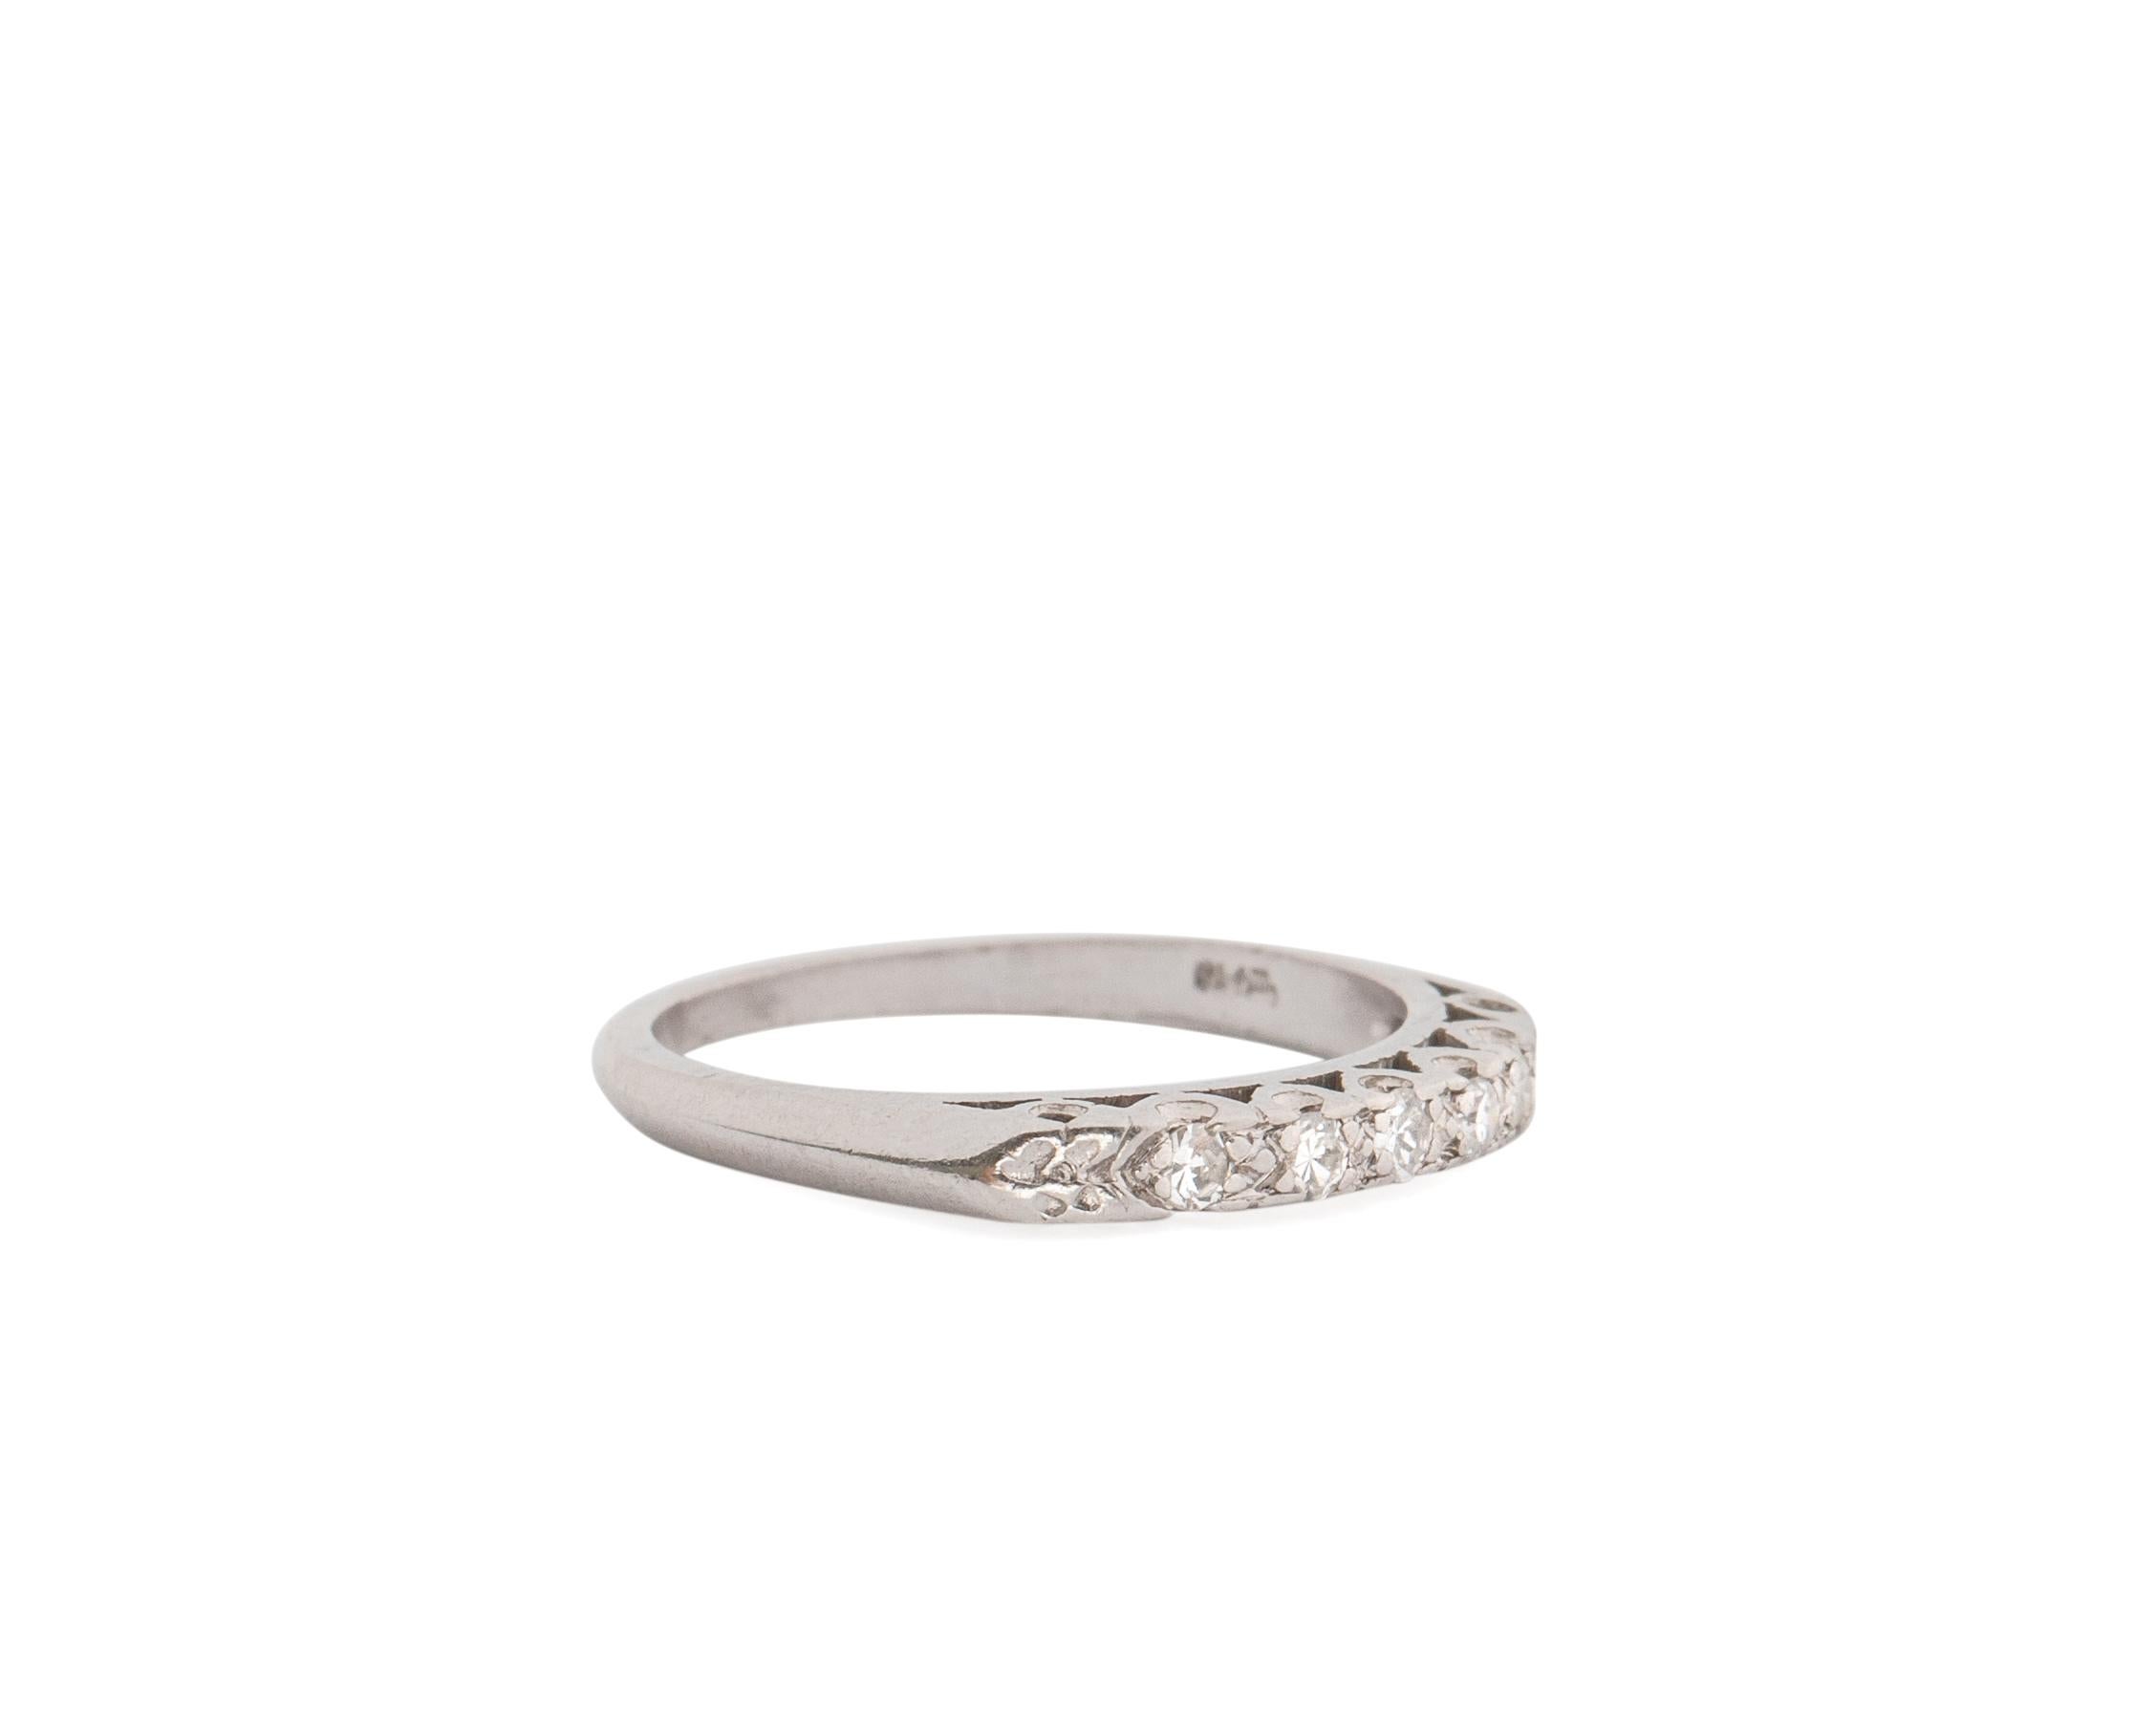 Item Details:
Metal type: 14 Karat White Gold
Weight: 2.5 grams
Fits Ring Size 5 

Diamond Details: 
Cut: Single Cut
Carat: .15 Carats
Color: F
Clarity: VS

Ring Features:
Made in 1930s, Art Deco Era
Fits Ring Size 5
Simplistic ring band design